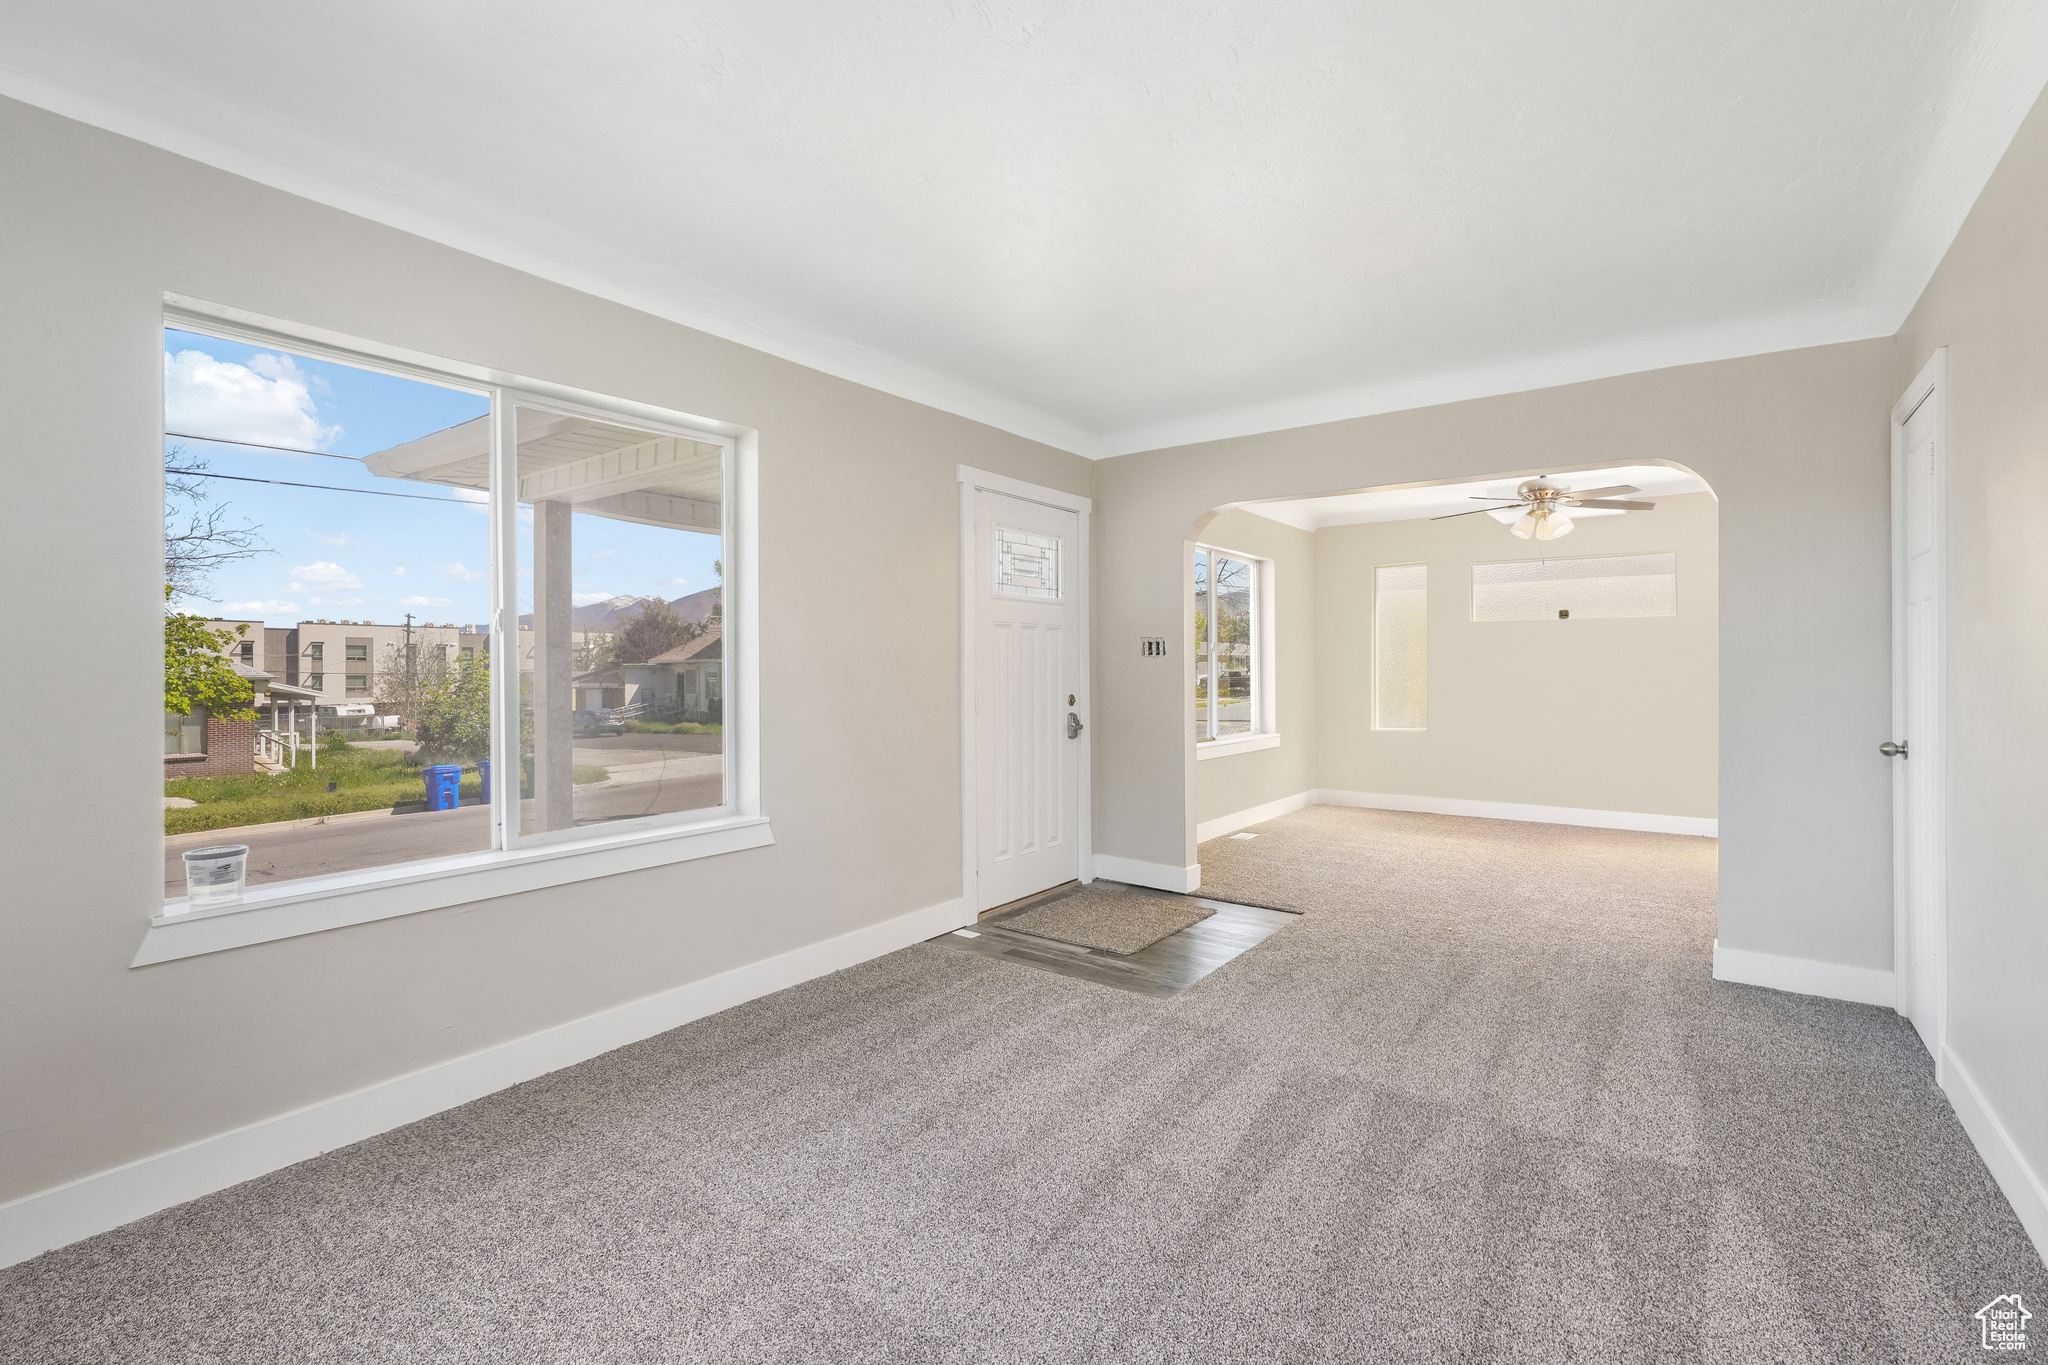 Carpeted entrance, living room with a healthy amount of sunlight